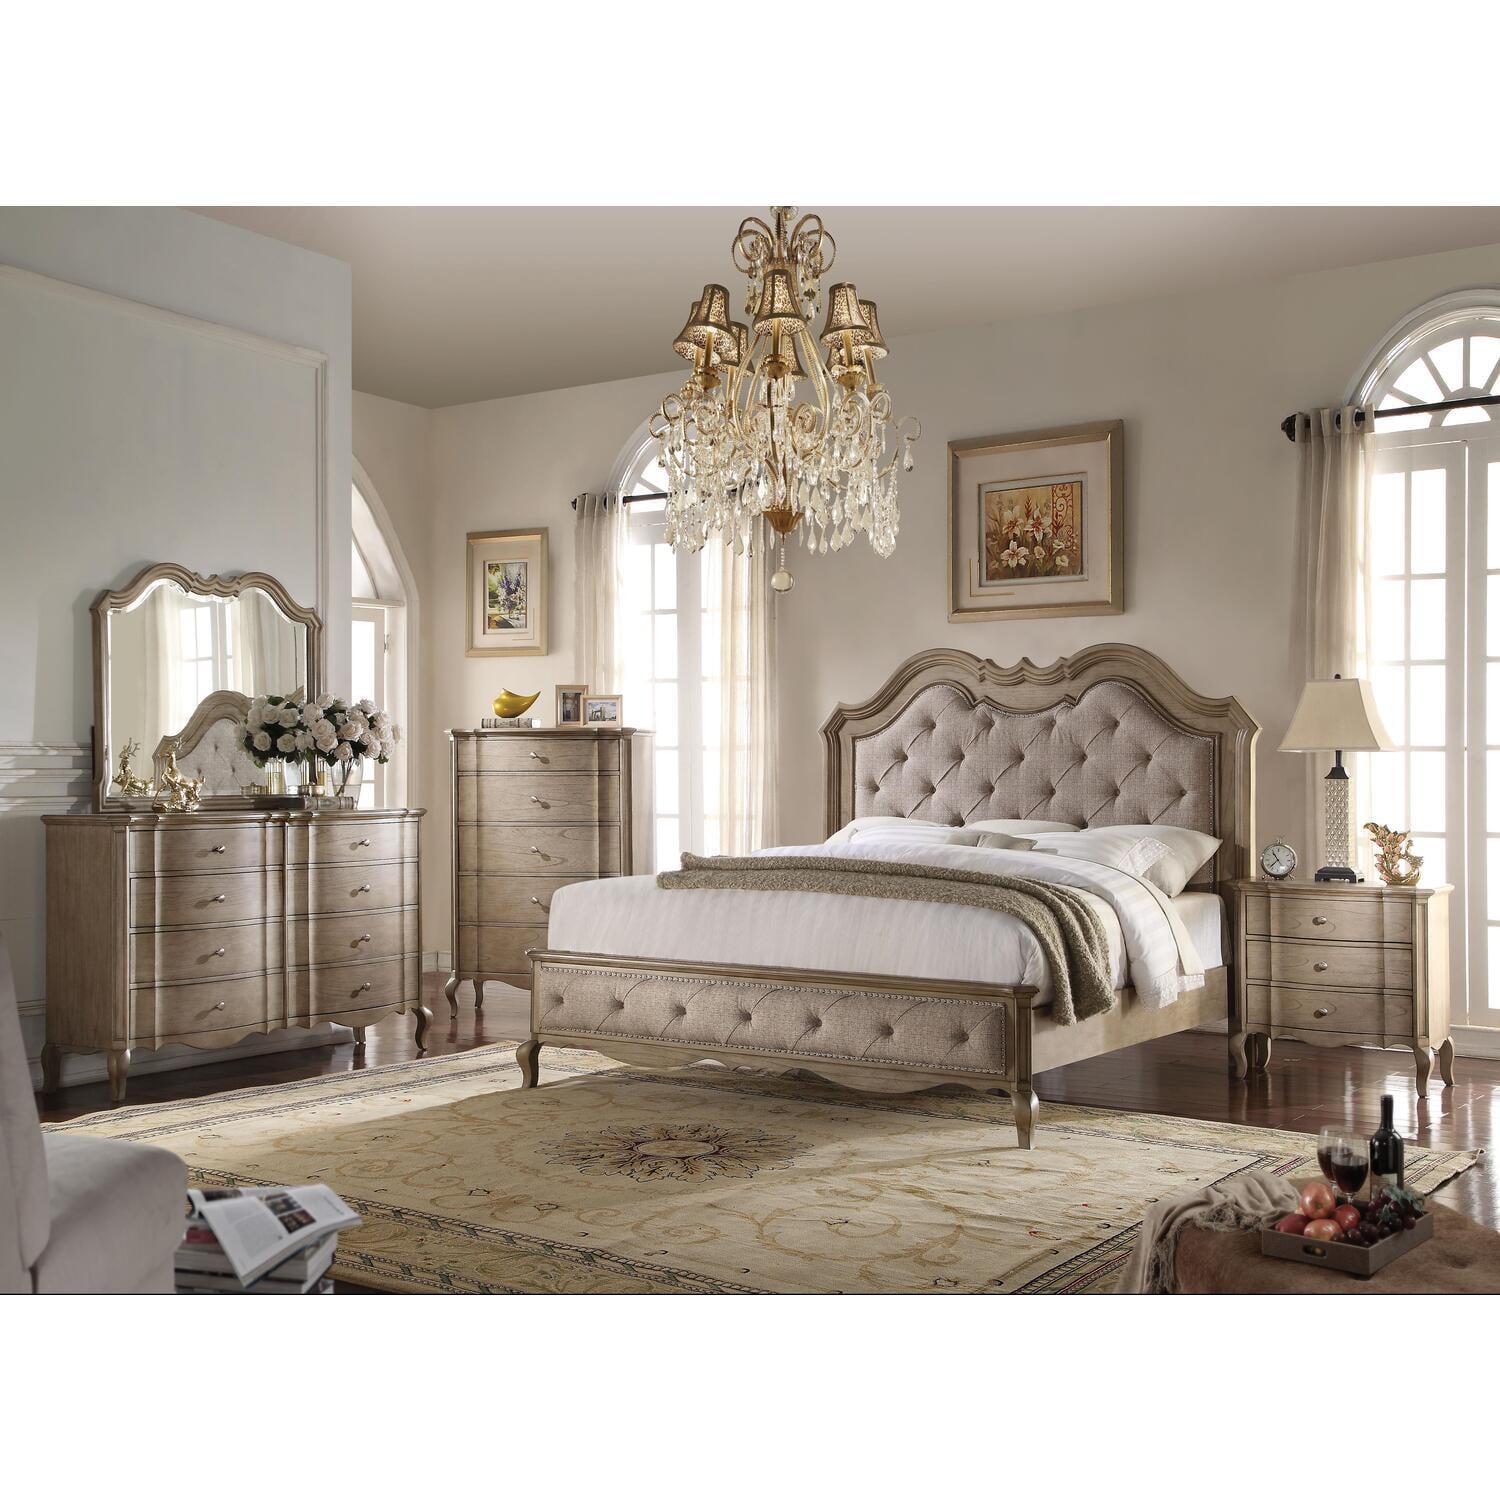 Elegant Beige Fabric Queen Bed with Tufted Nailhead Upholstery